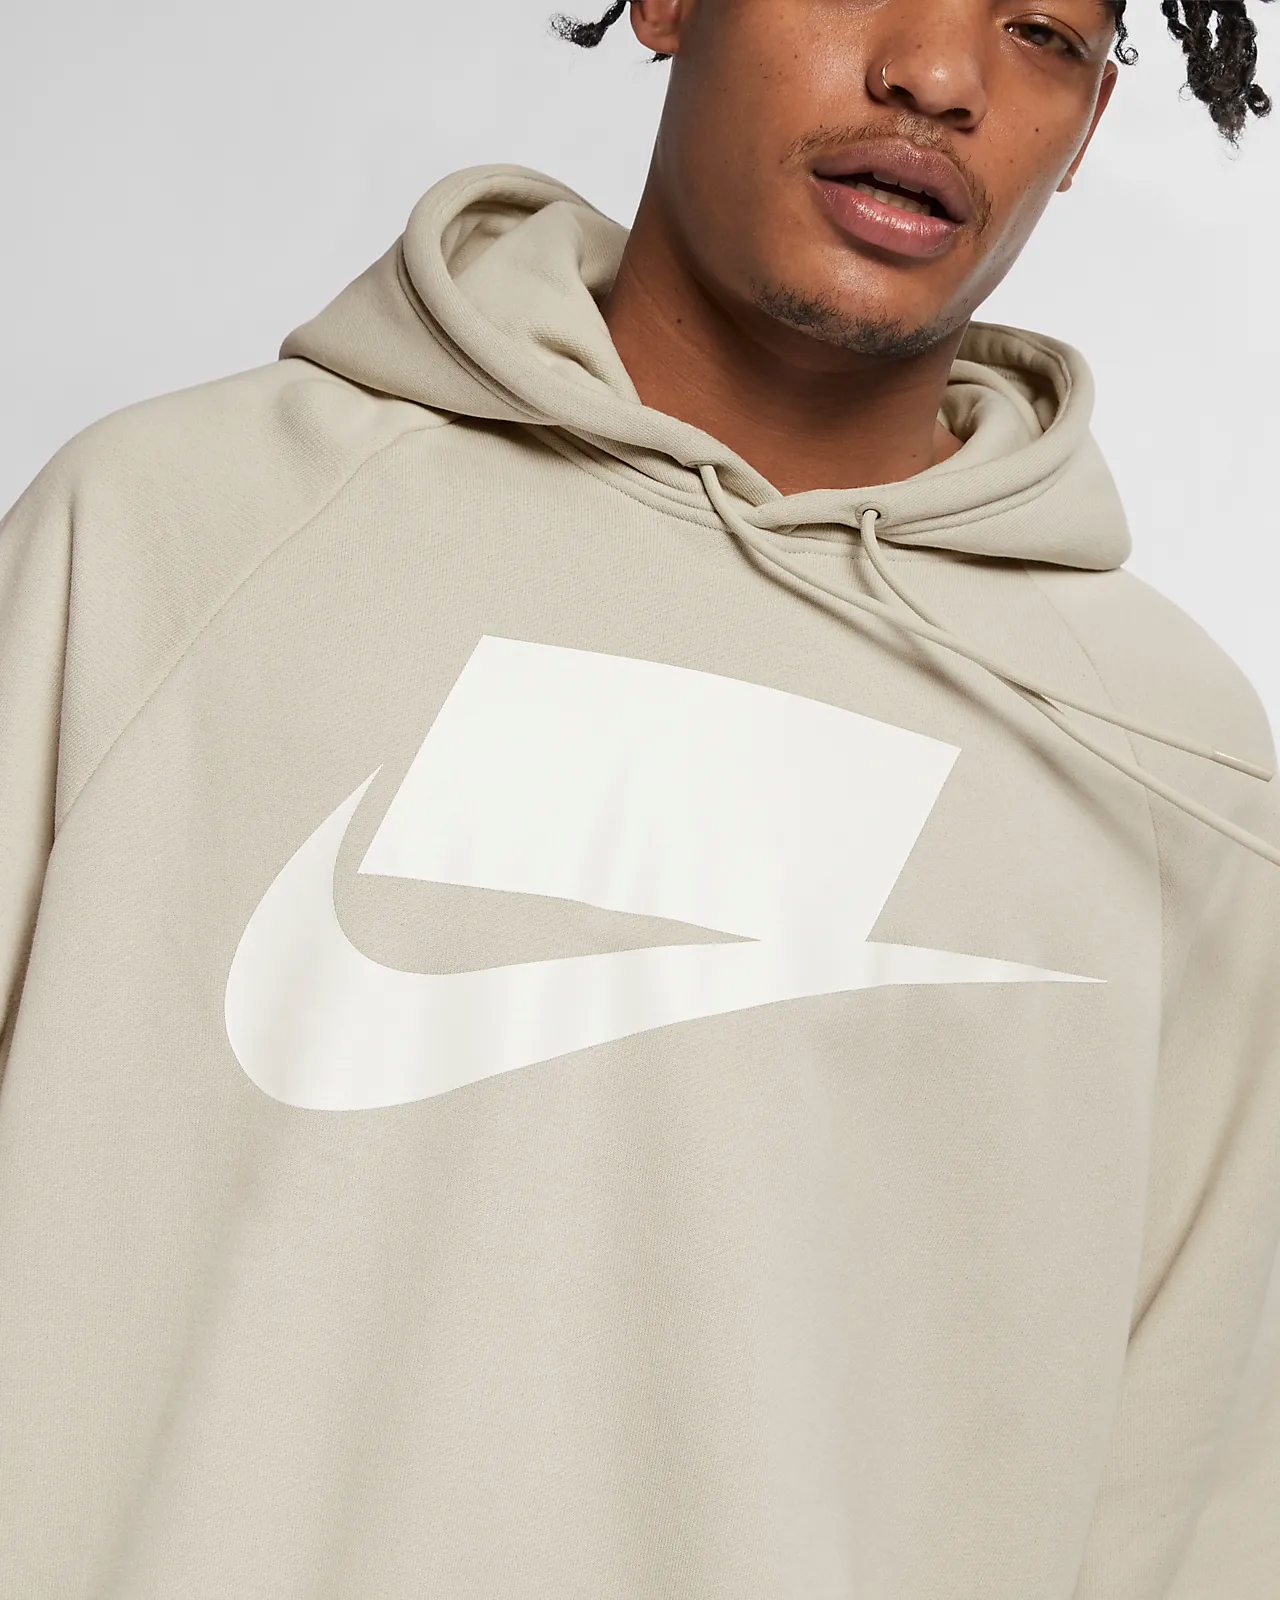 nike men's french terry hoodie